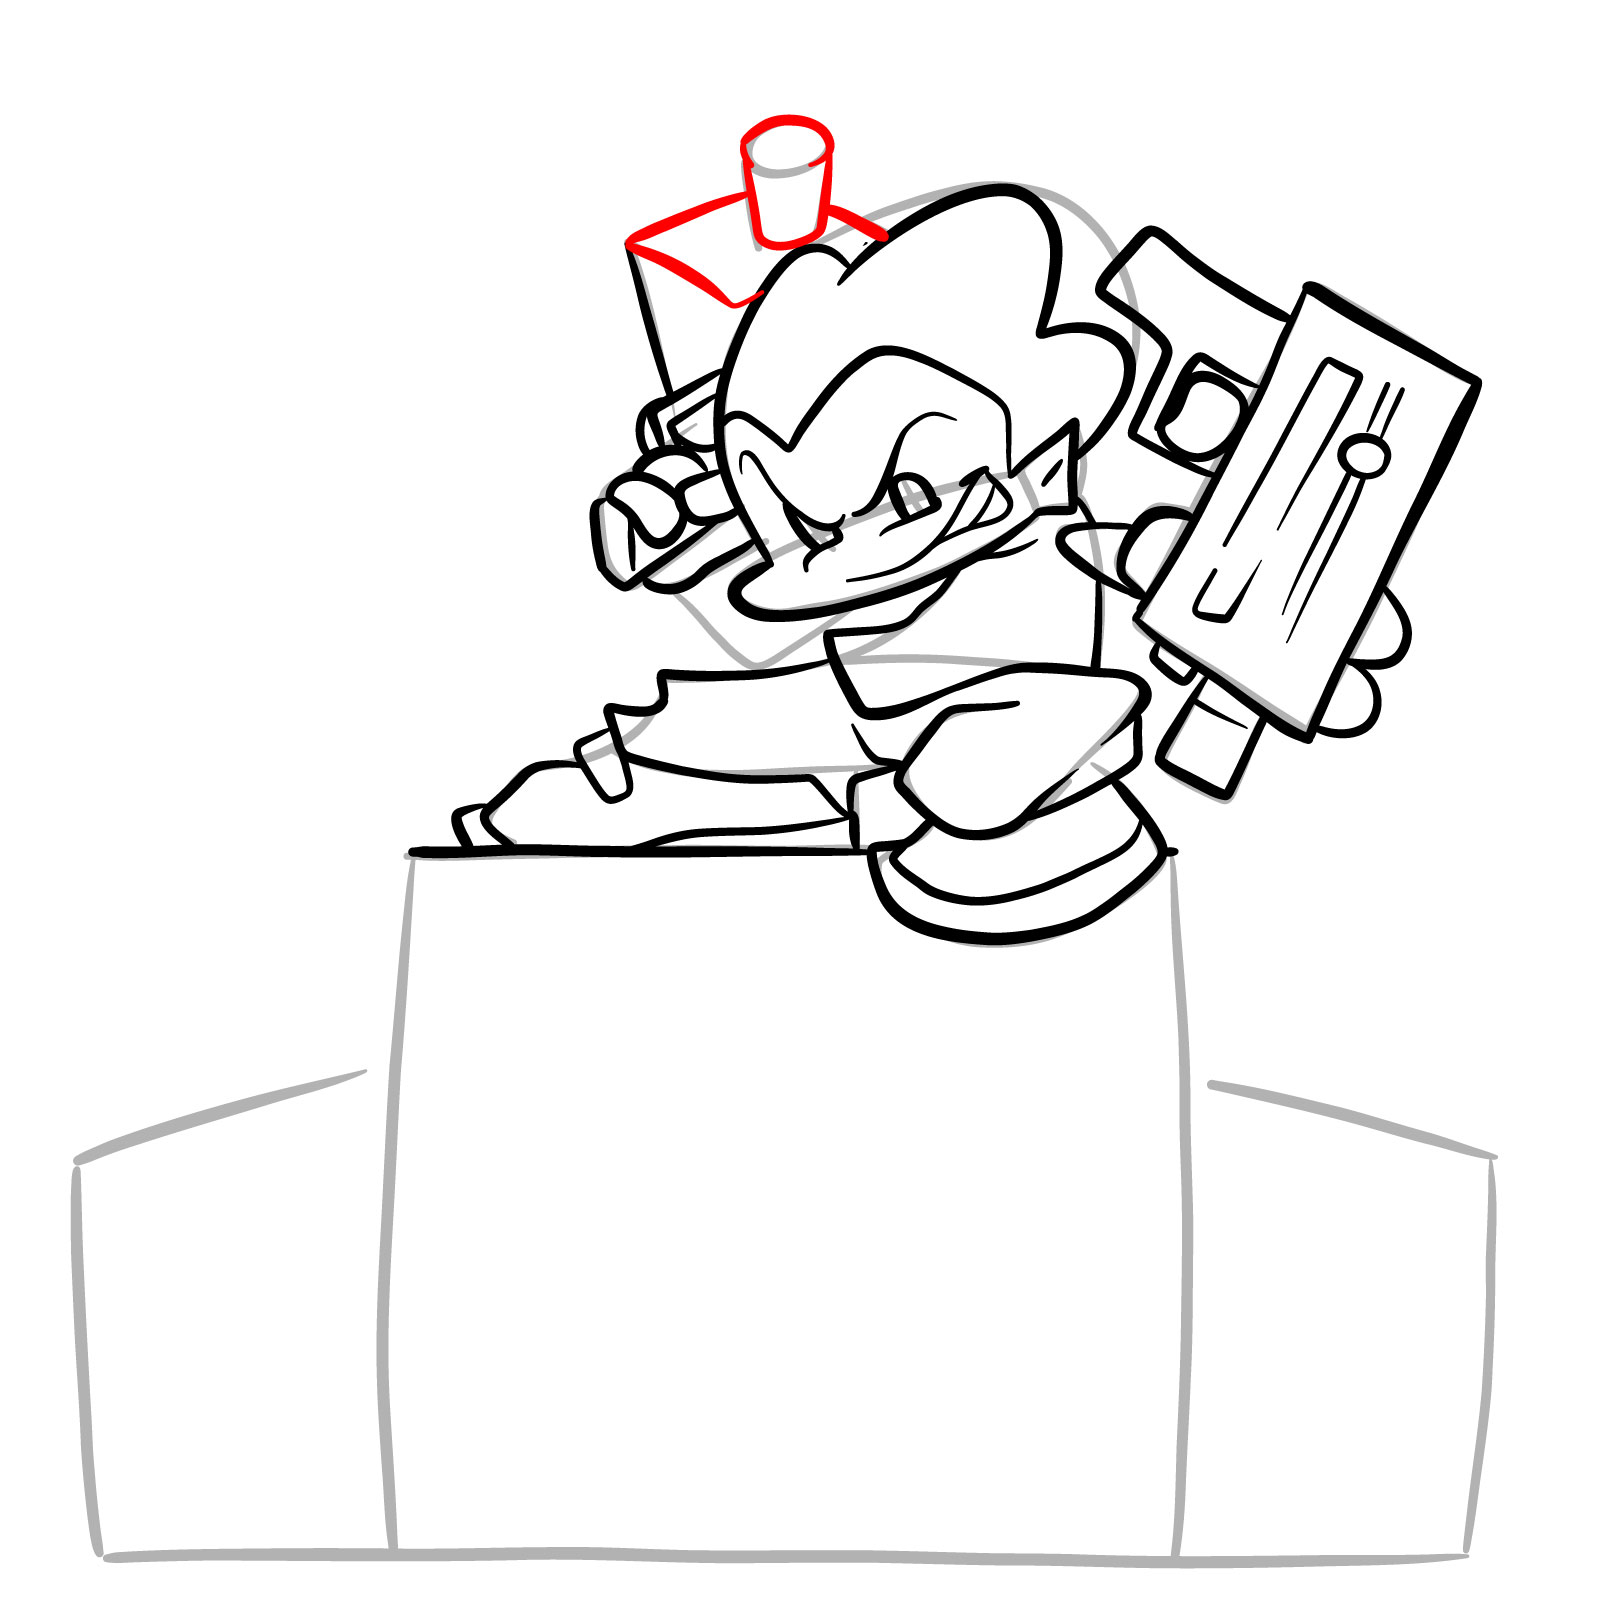 How to draw Pico on the speakers - step 23